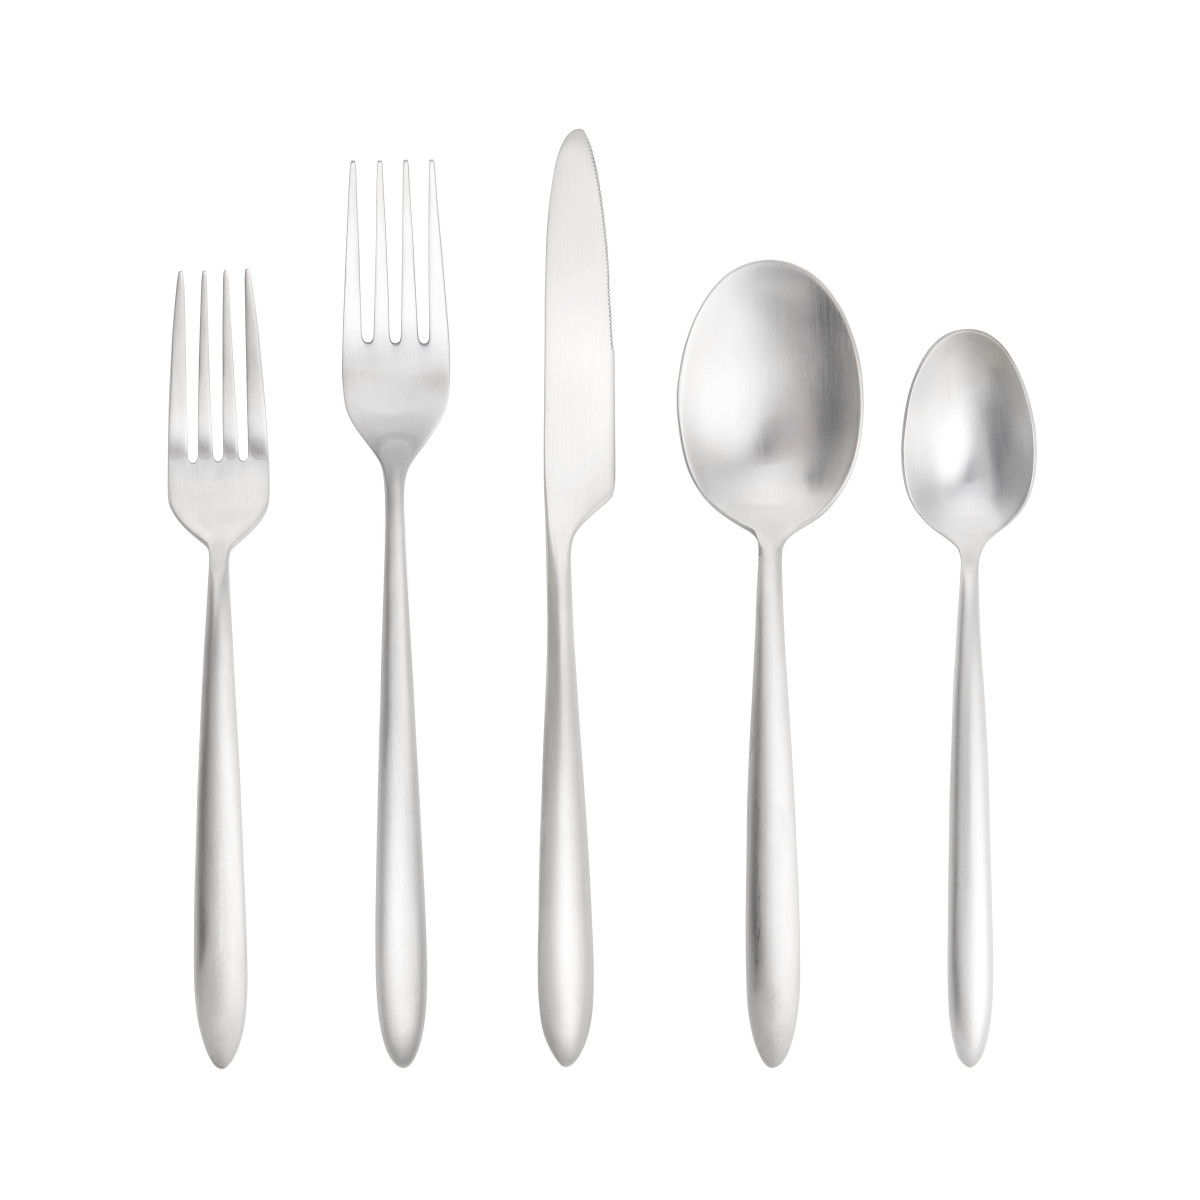 Velo Flatware, Brushed Stainless Steel, 5-Piece Set